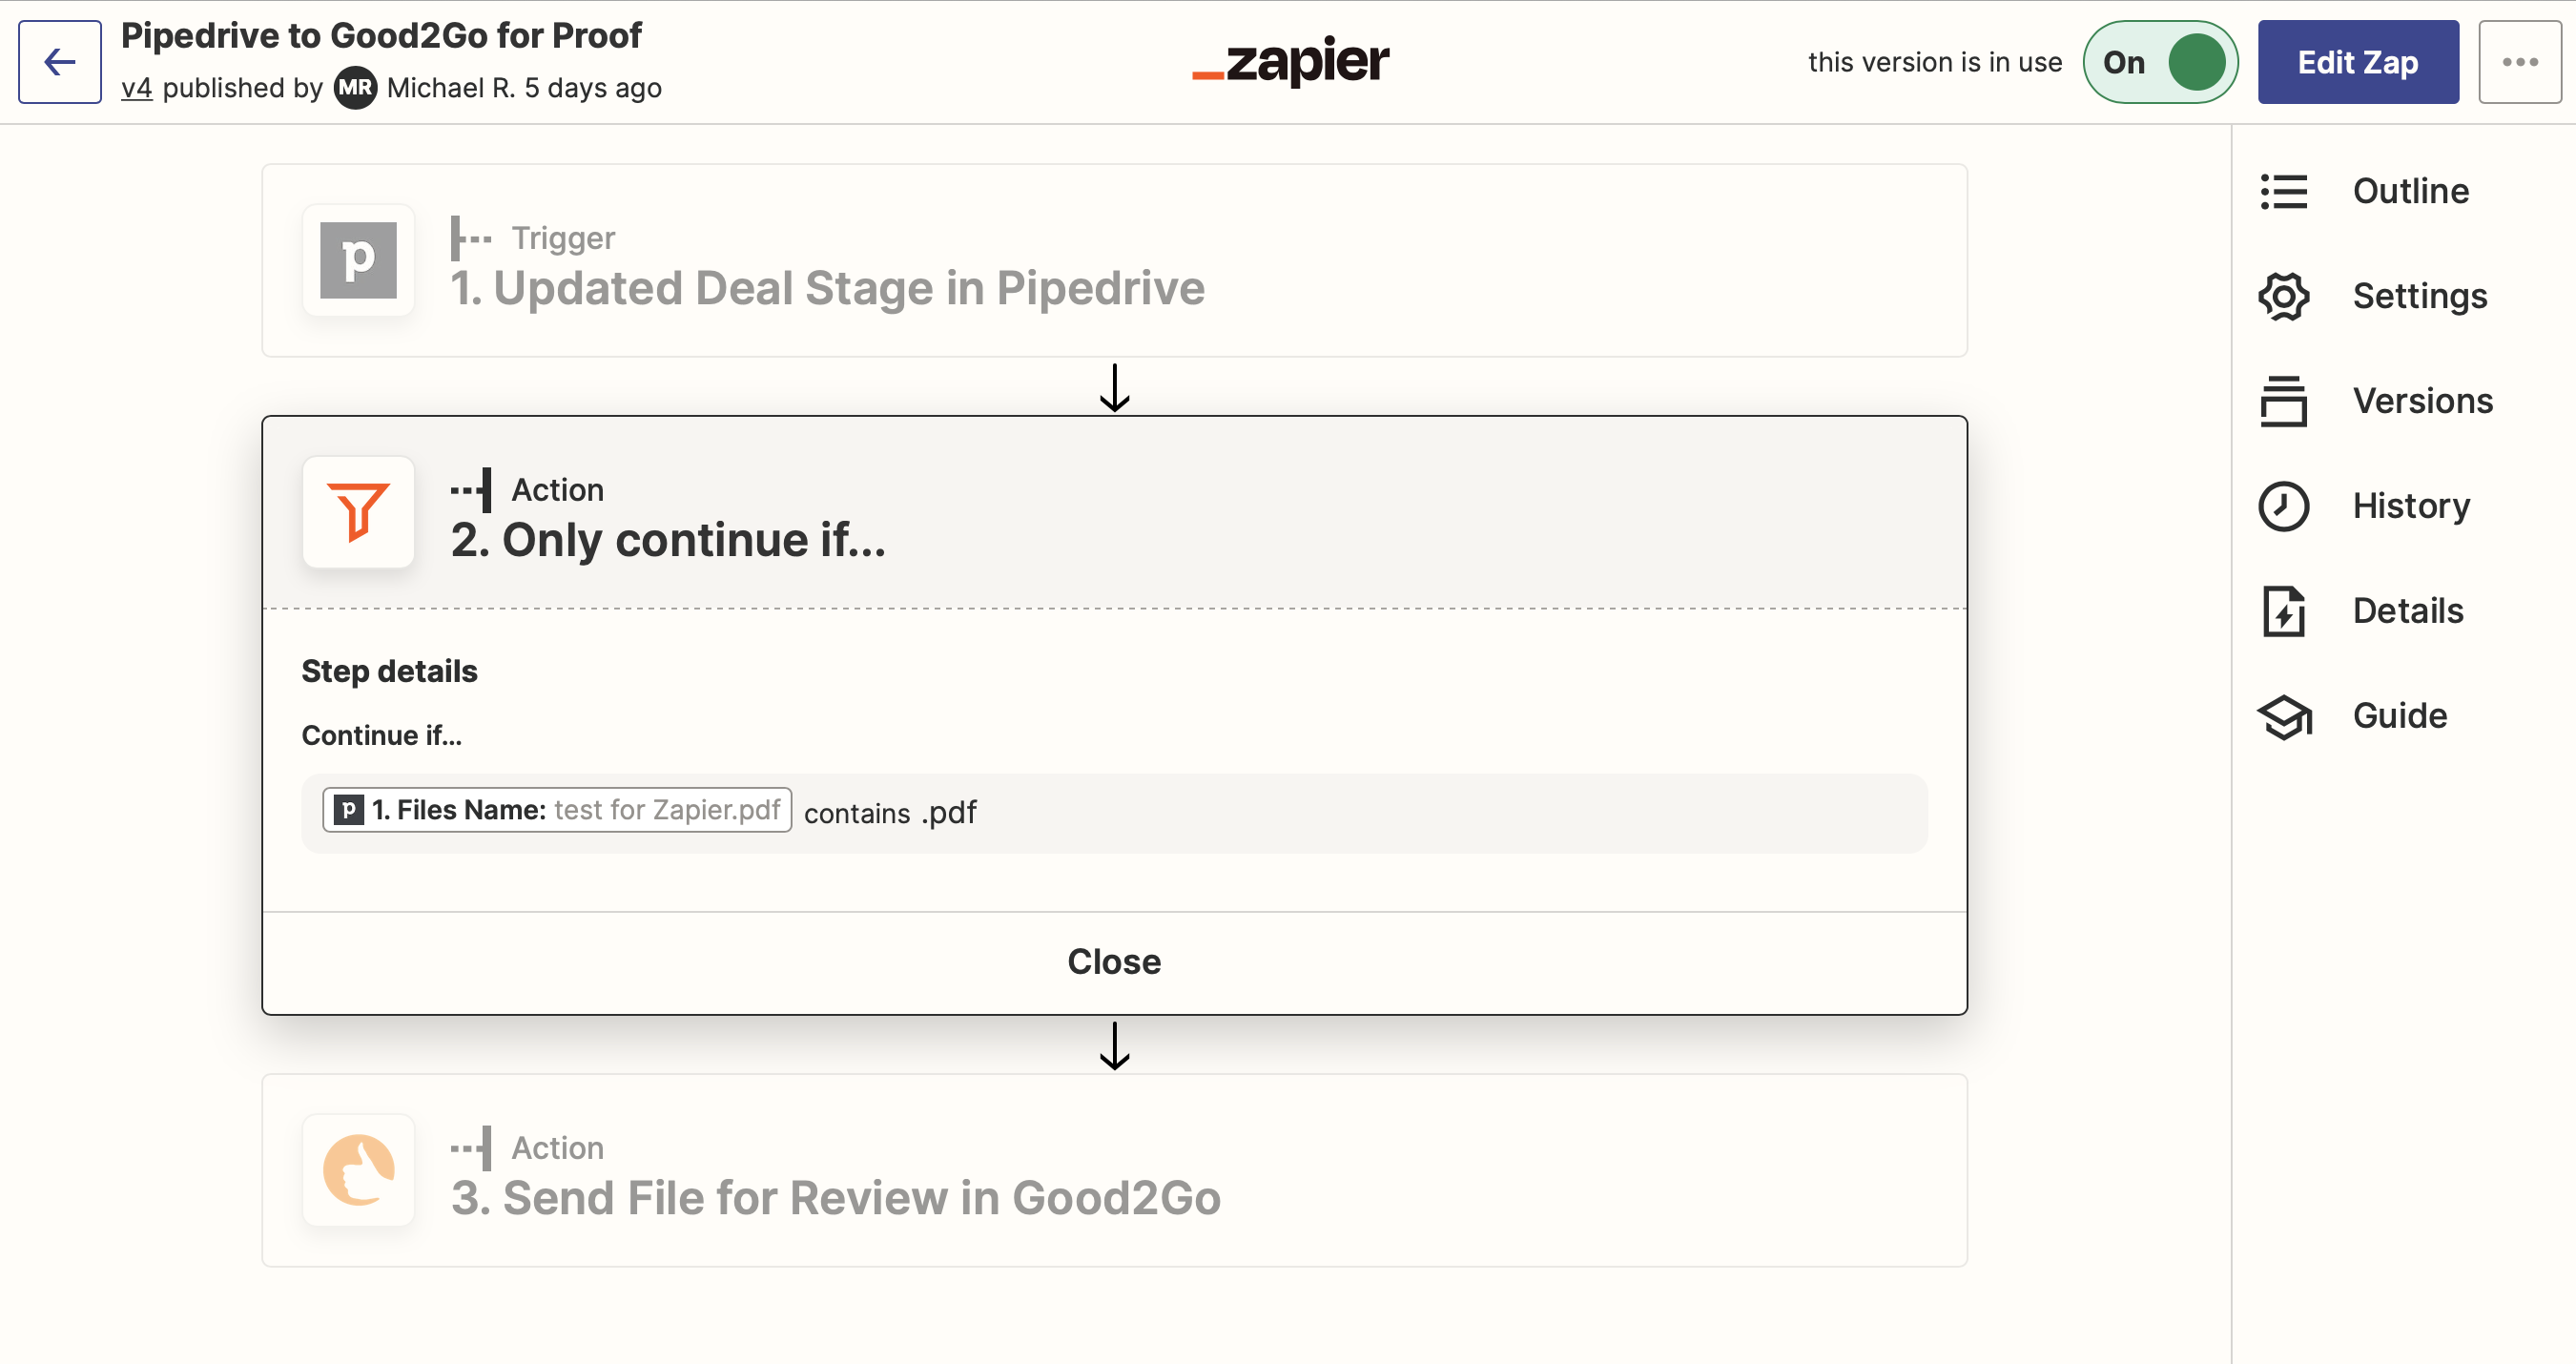 A Zapier Zap using Good2Go for online proofing